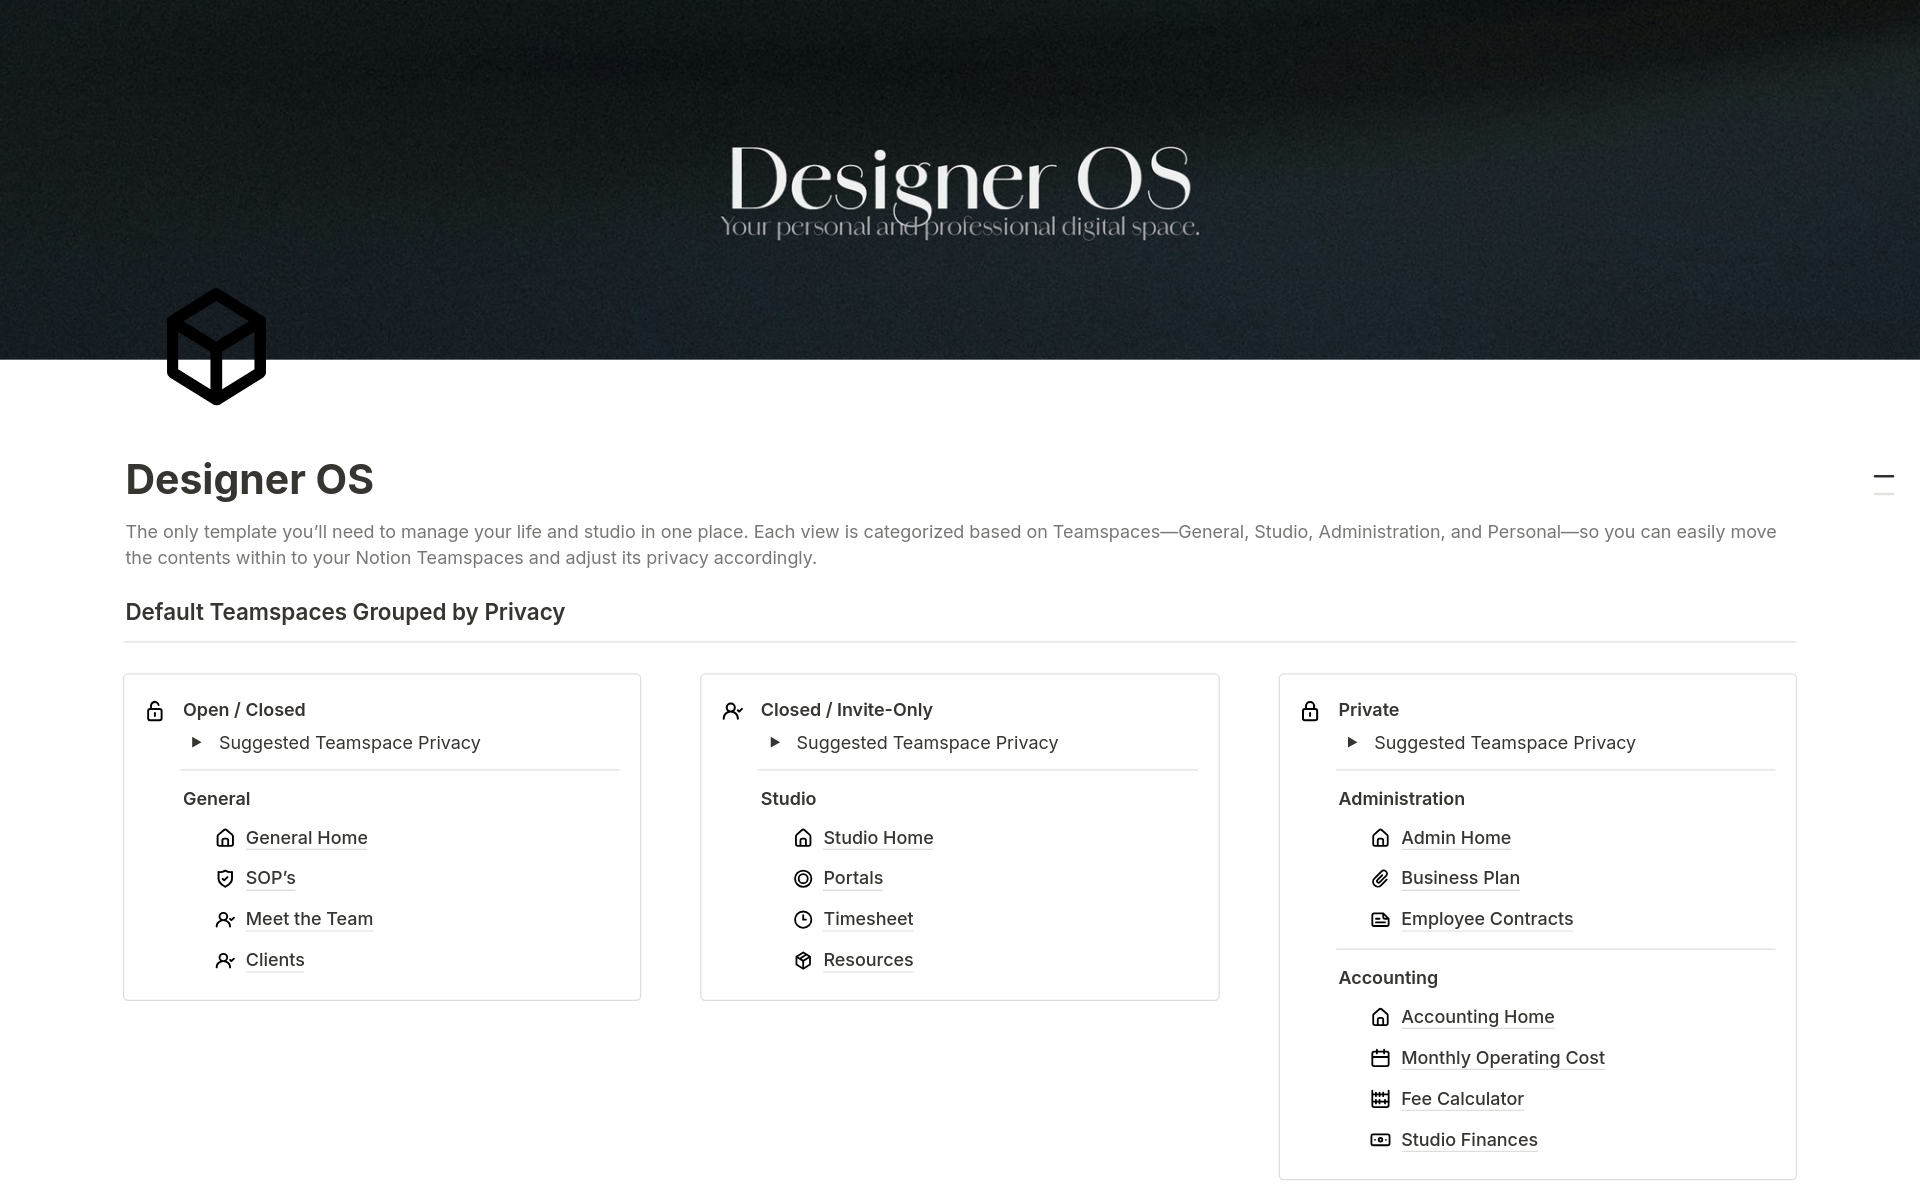 Designer OS was created by thechristhetics. This template can help you manage both your life and your studio.